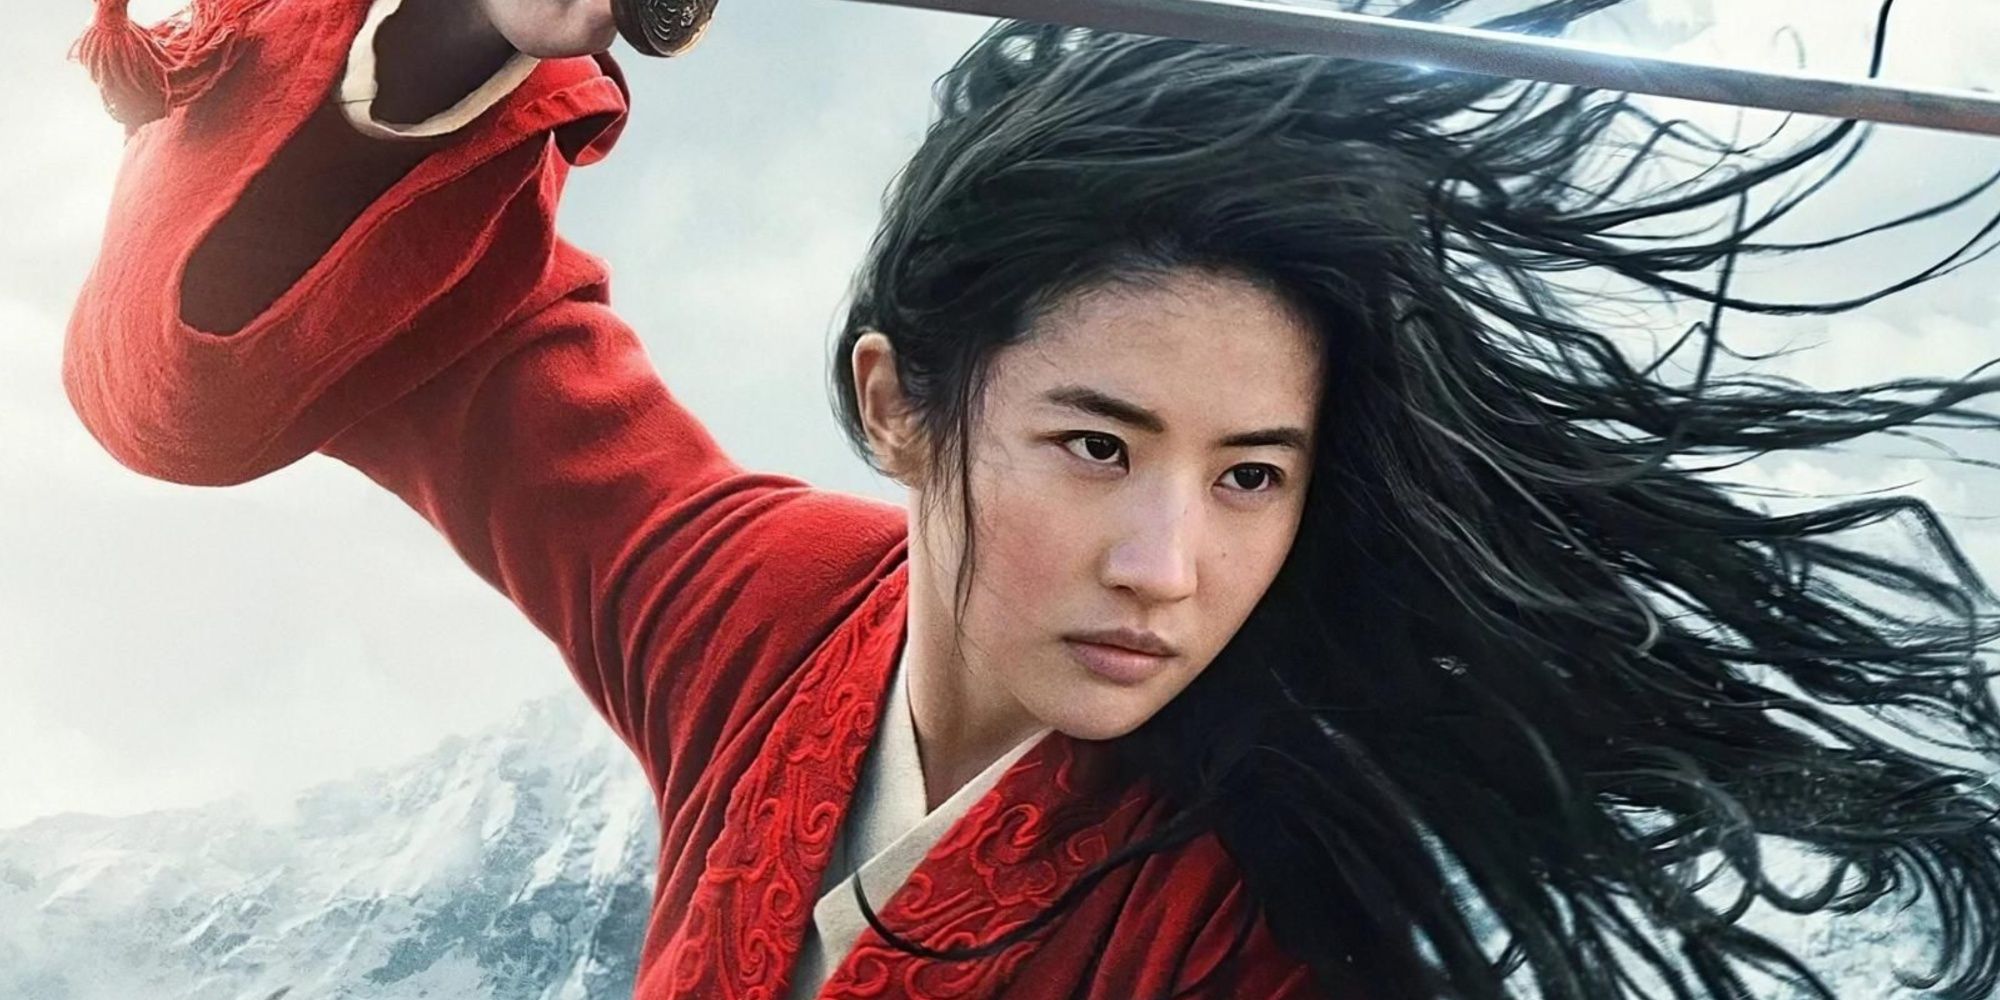 As seen on the cover of the film, Mulan is dressed in red, holds a blade, and has hair waving in the wind.